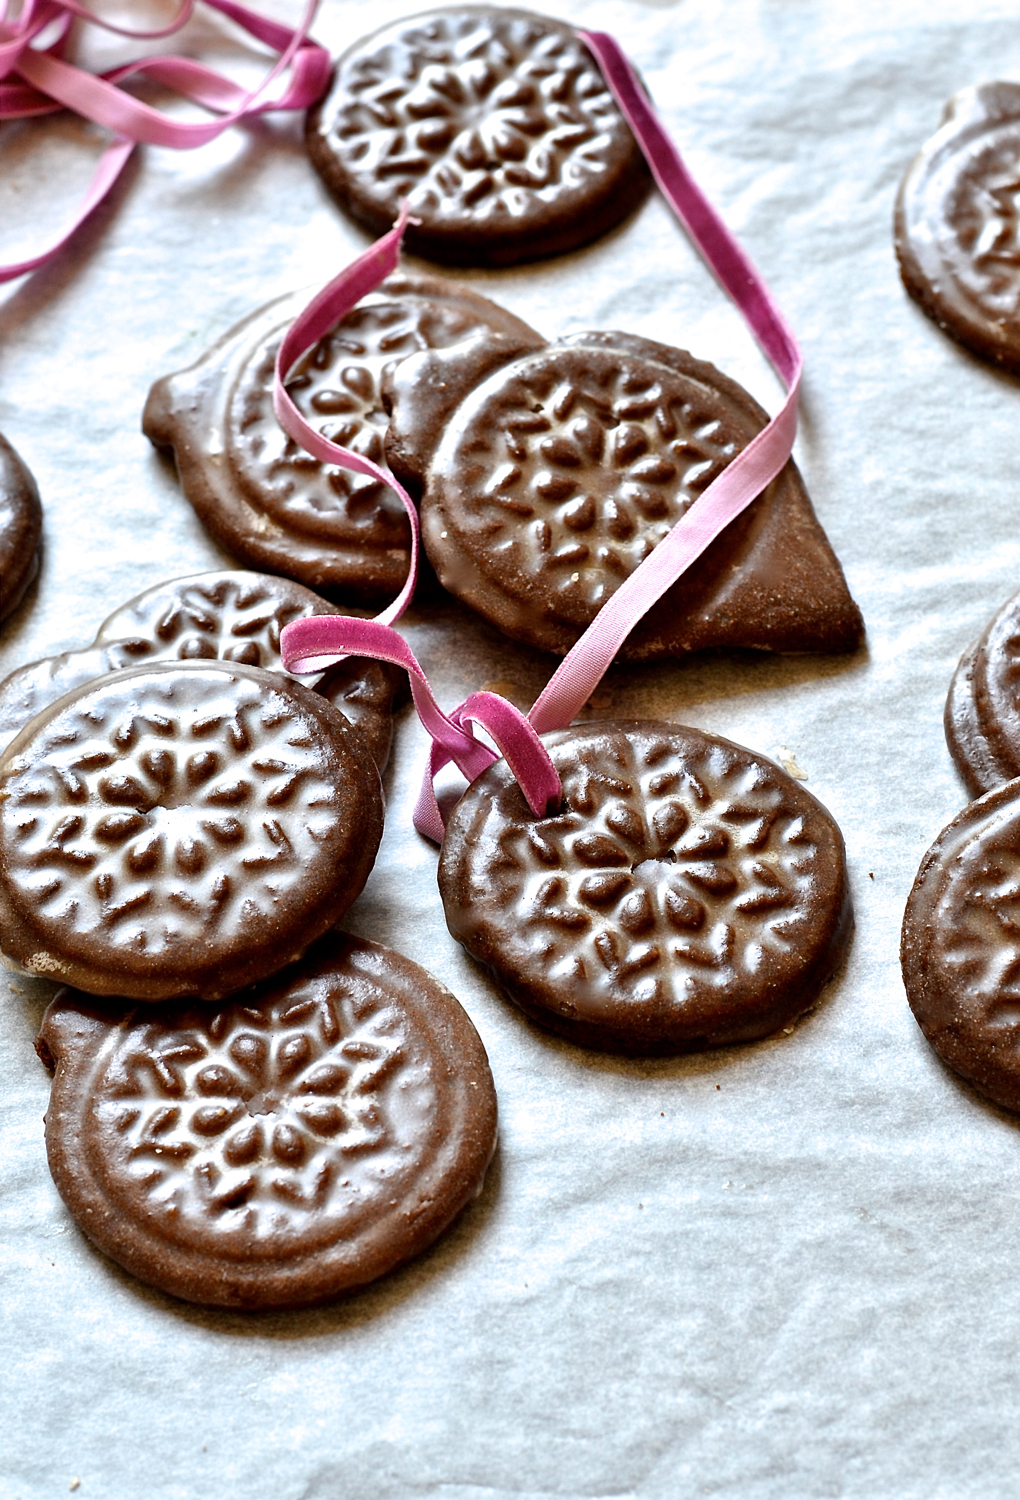 Ottolenghi's Ginger bread tile cookies